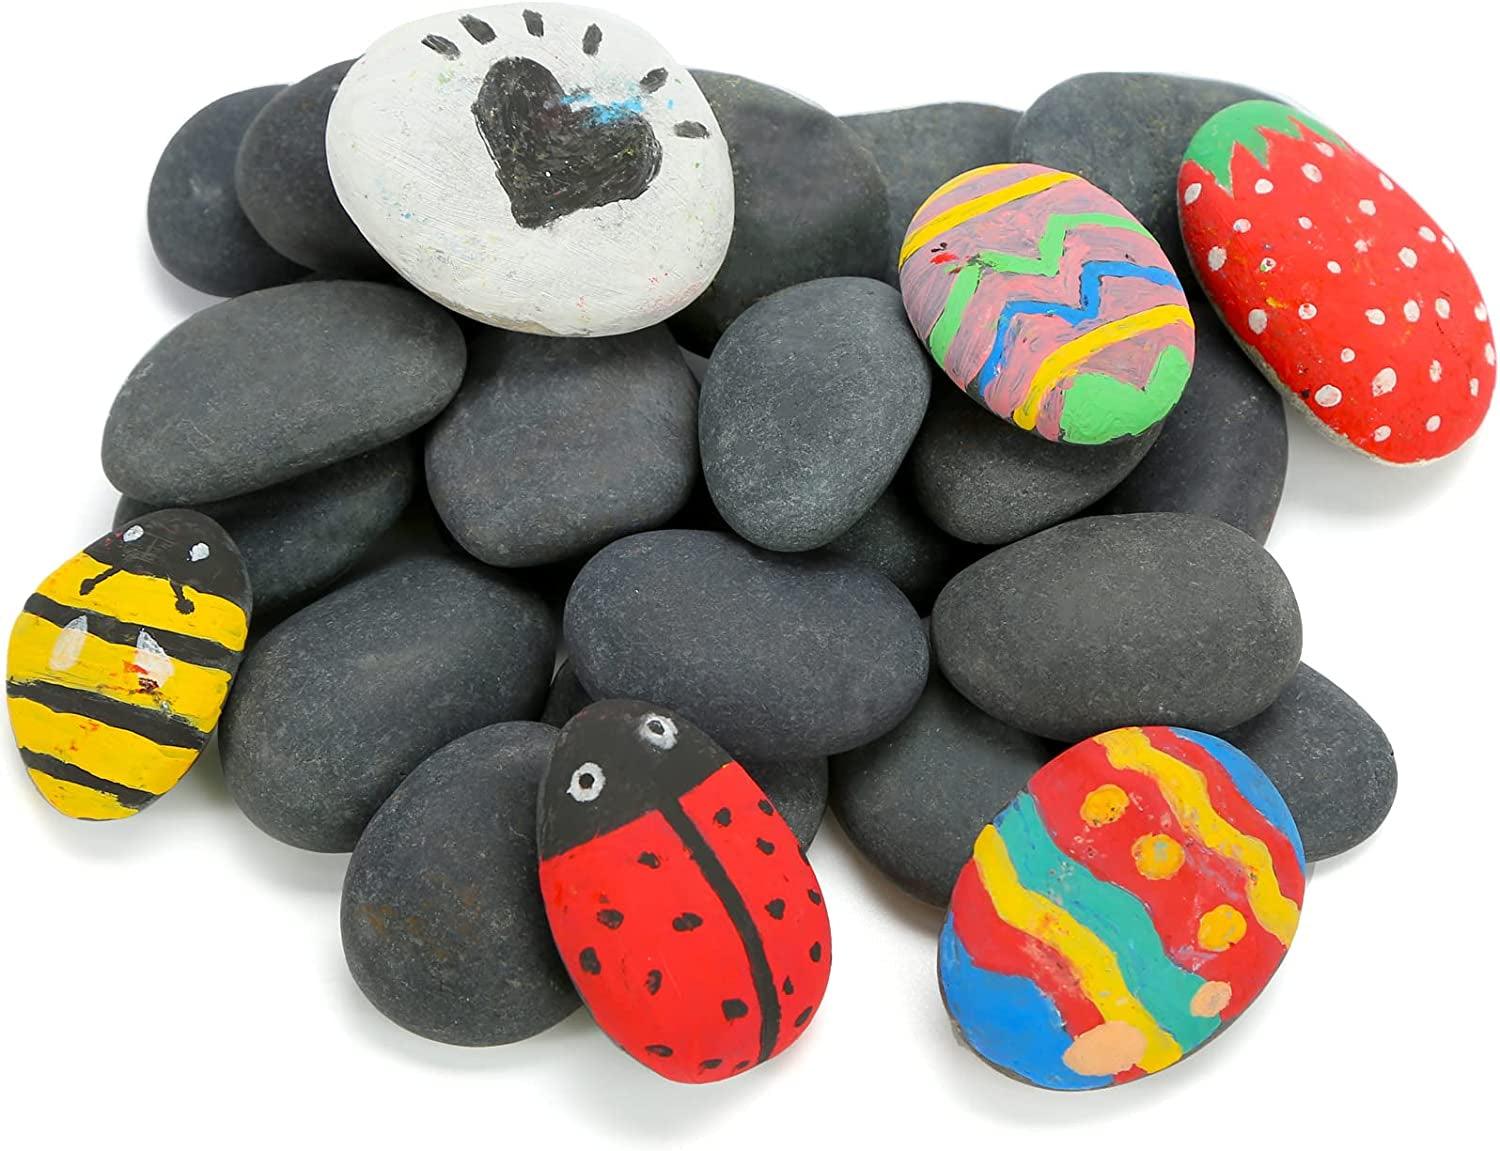 20PCS River Rocks for Painting, Kindness Stones for DIY, Arts, 2